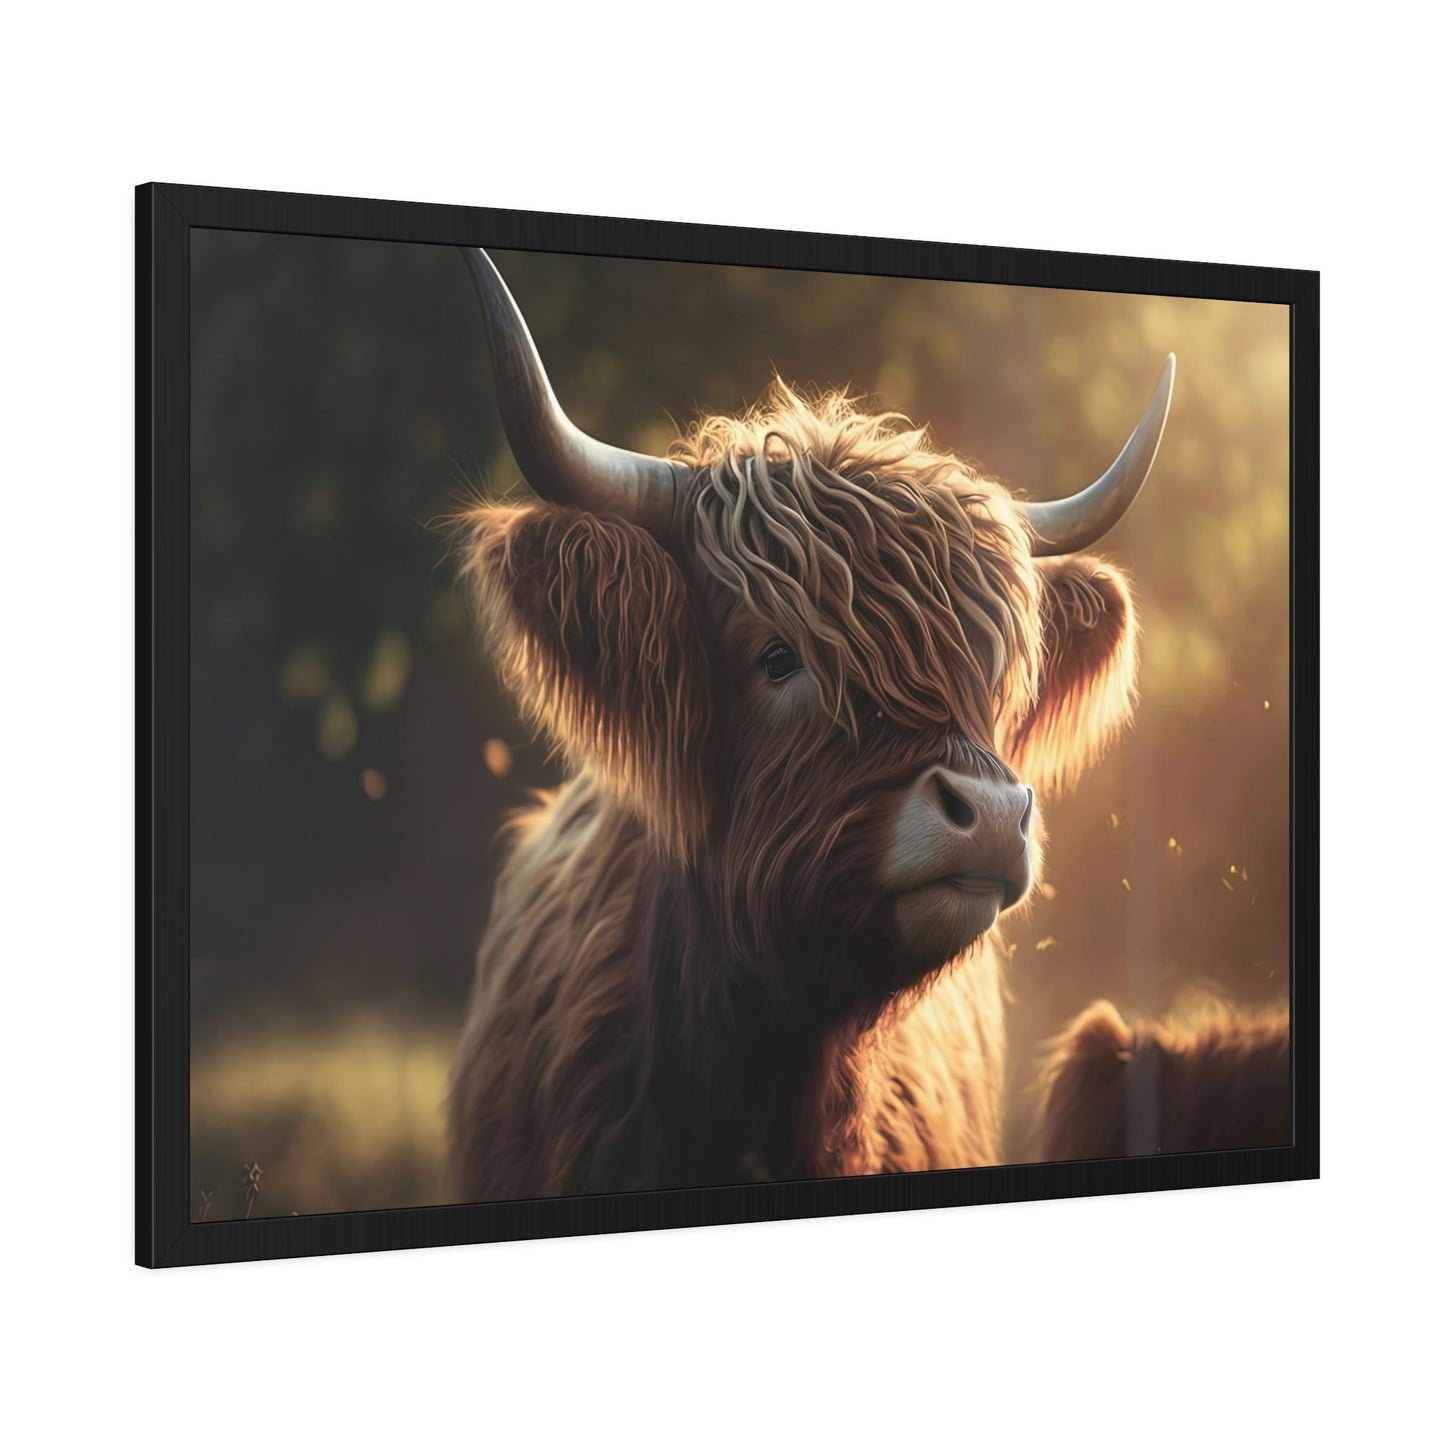 Farmhouse Chic: Cow on Canvas for a Stylish and Elegant Wall Art Accent